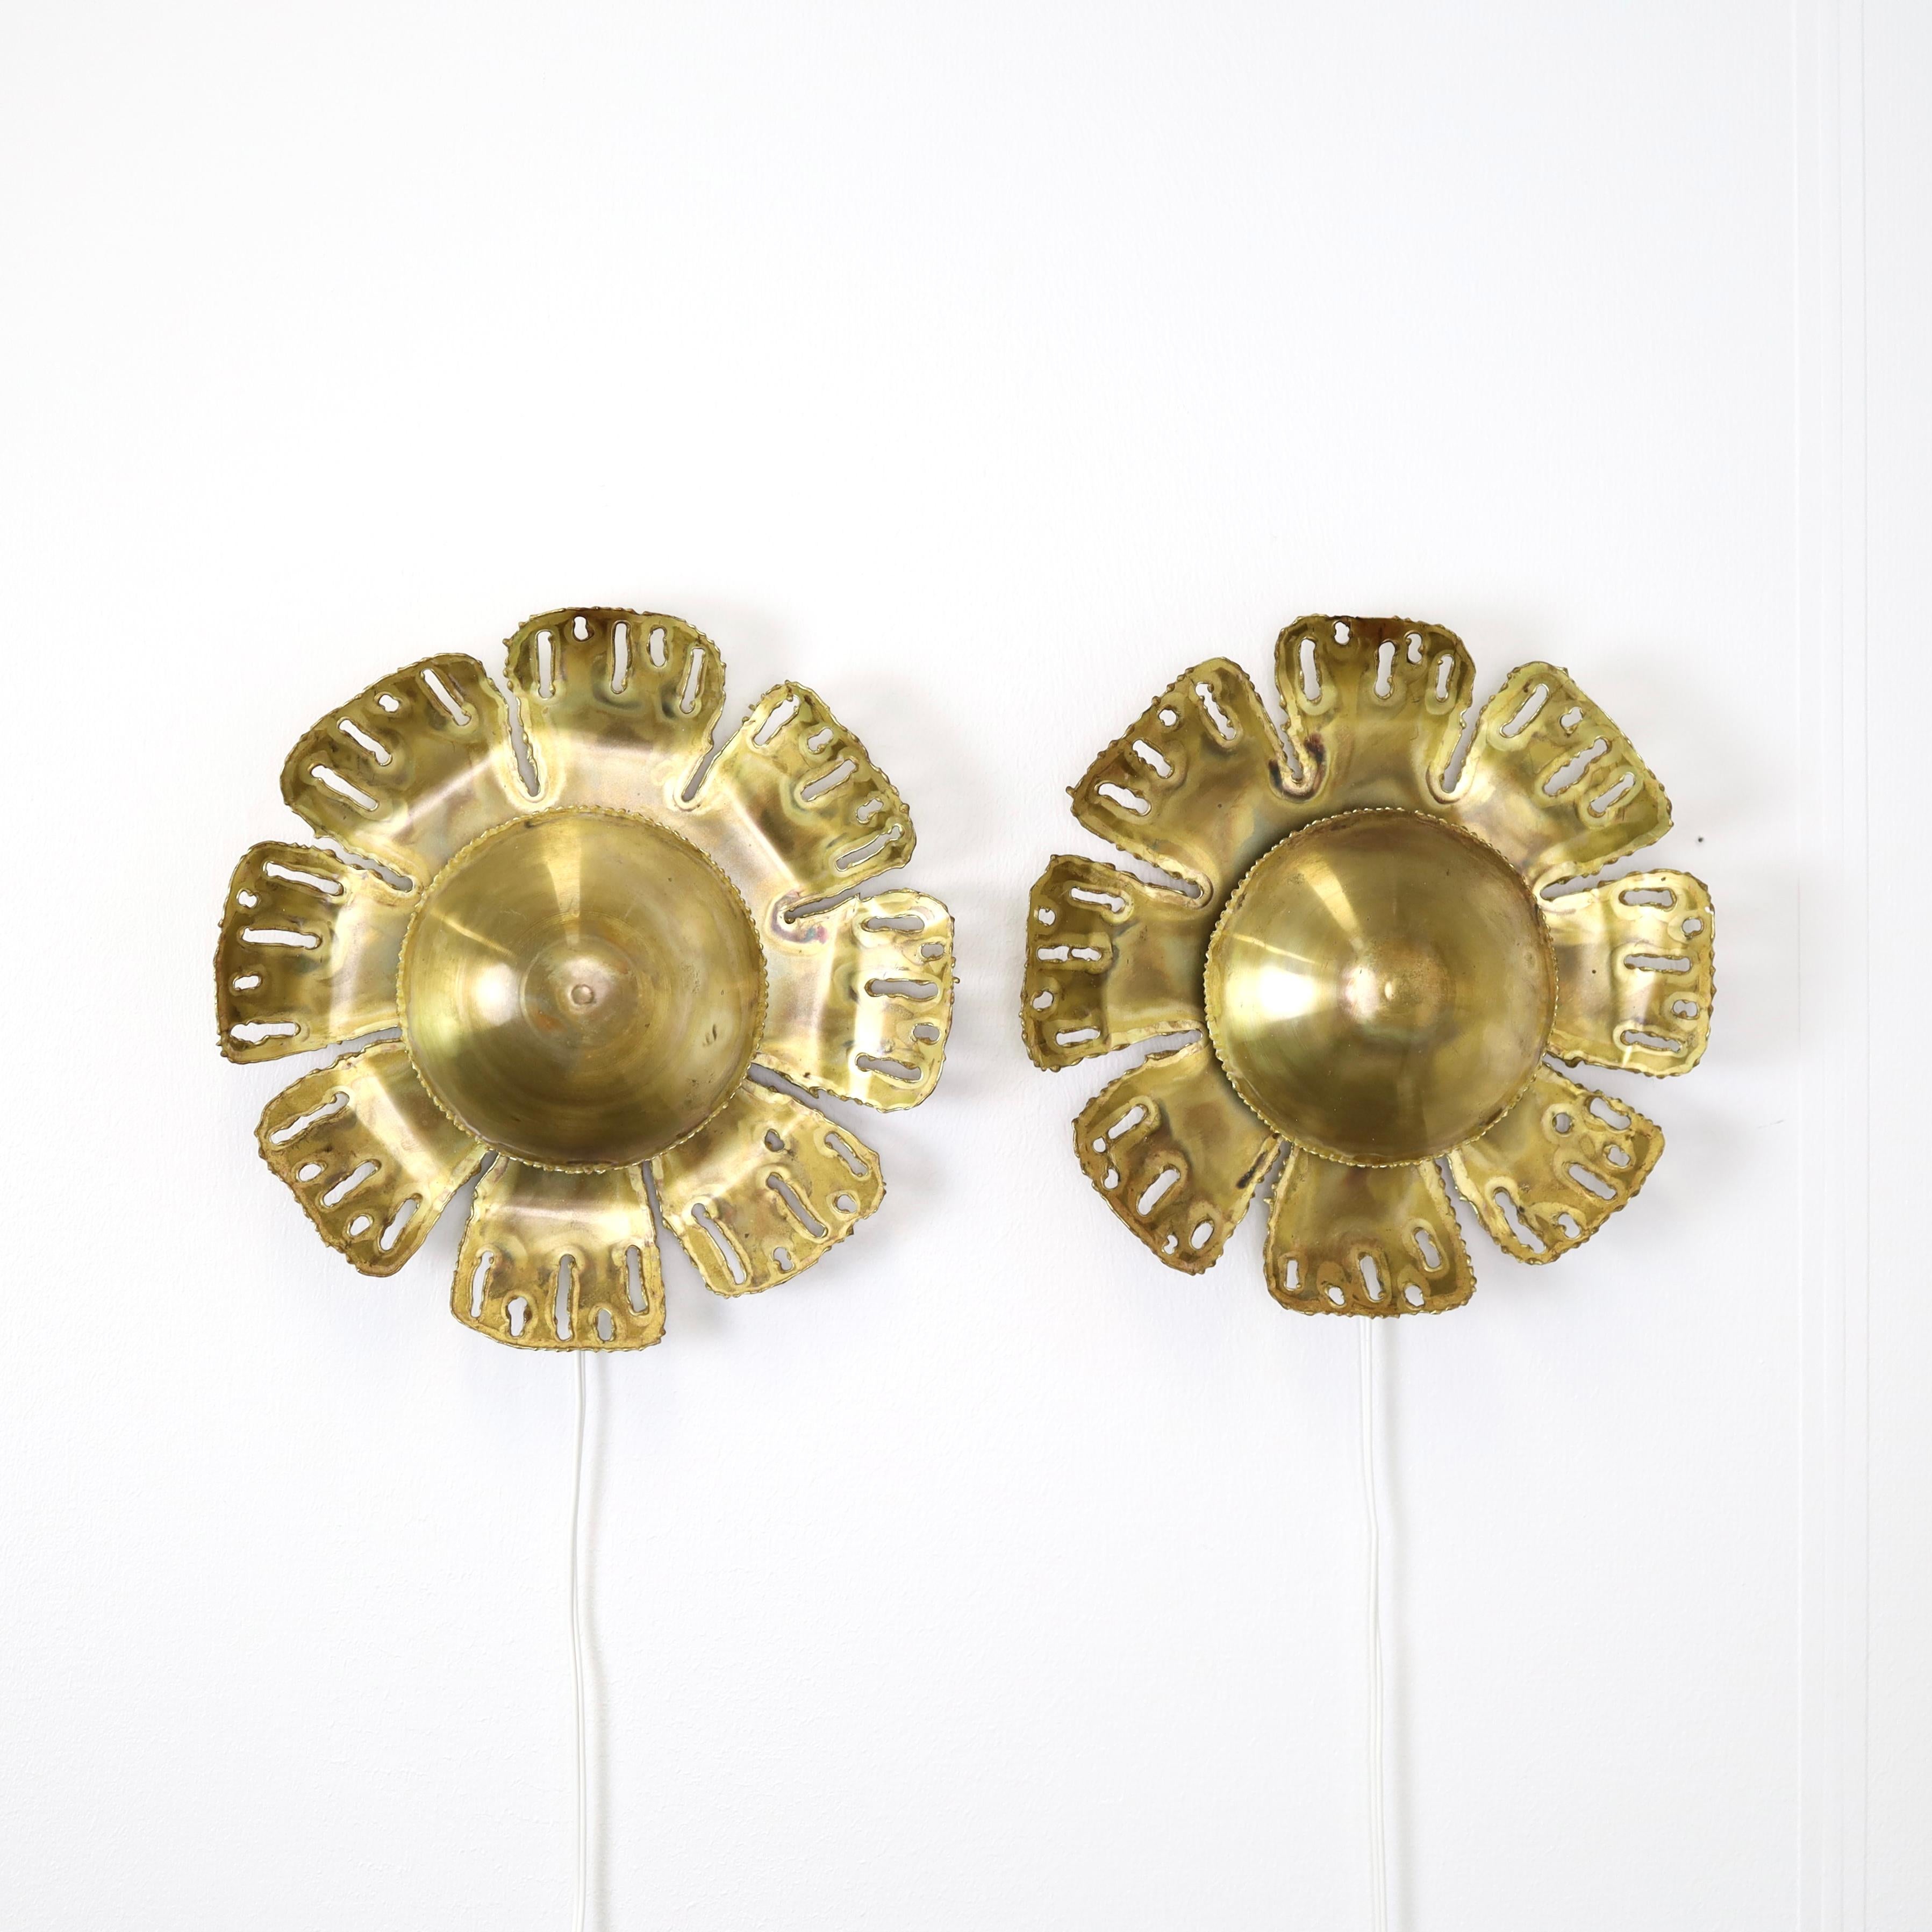 A set of Brass Wall Lamps by Svend Aage Holm Sorensen, 1960s, Denmark For Sale 5